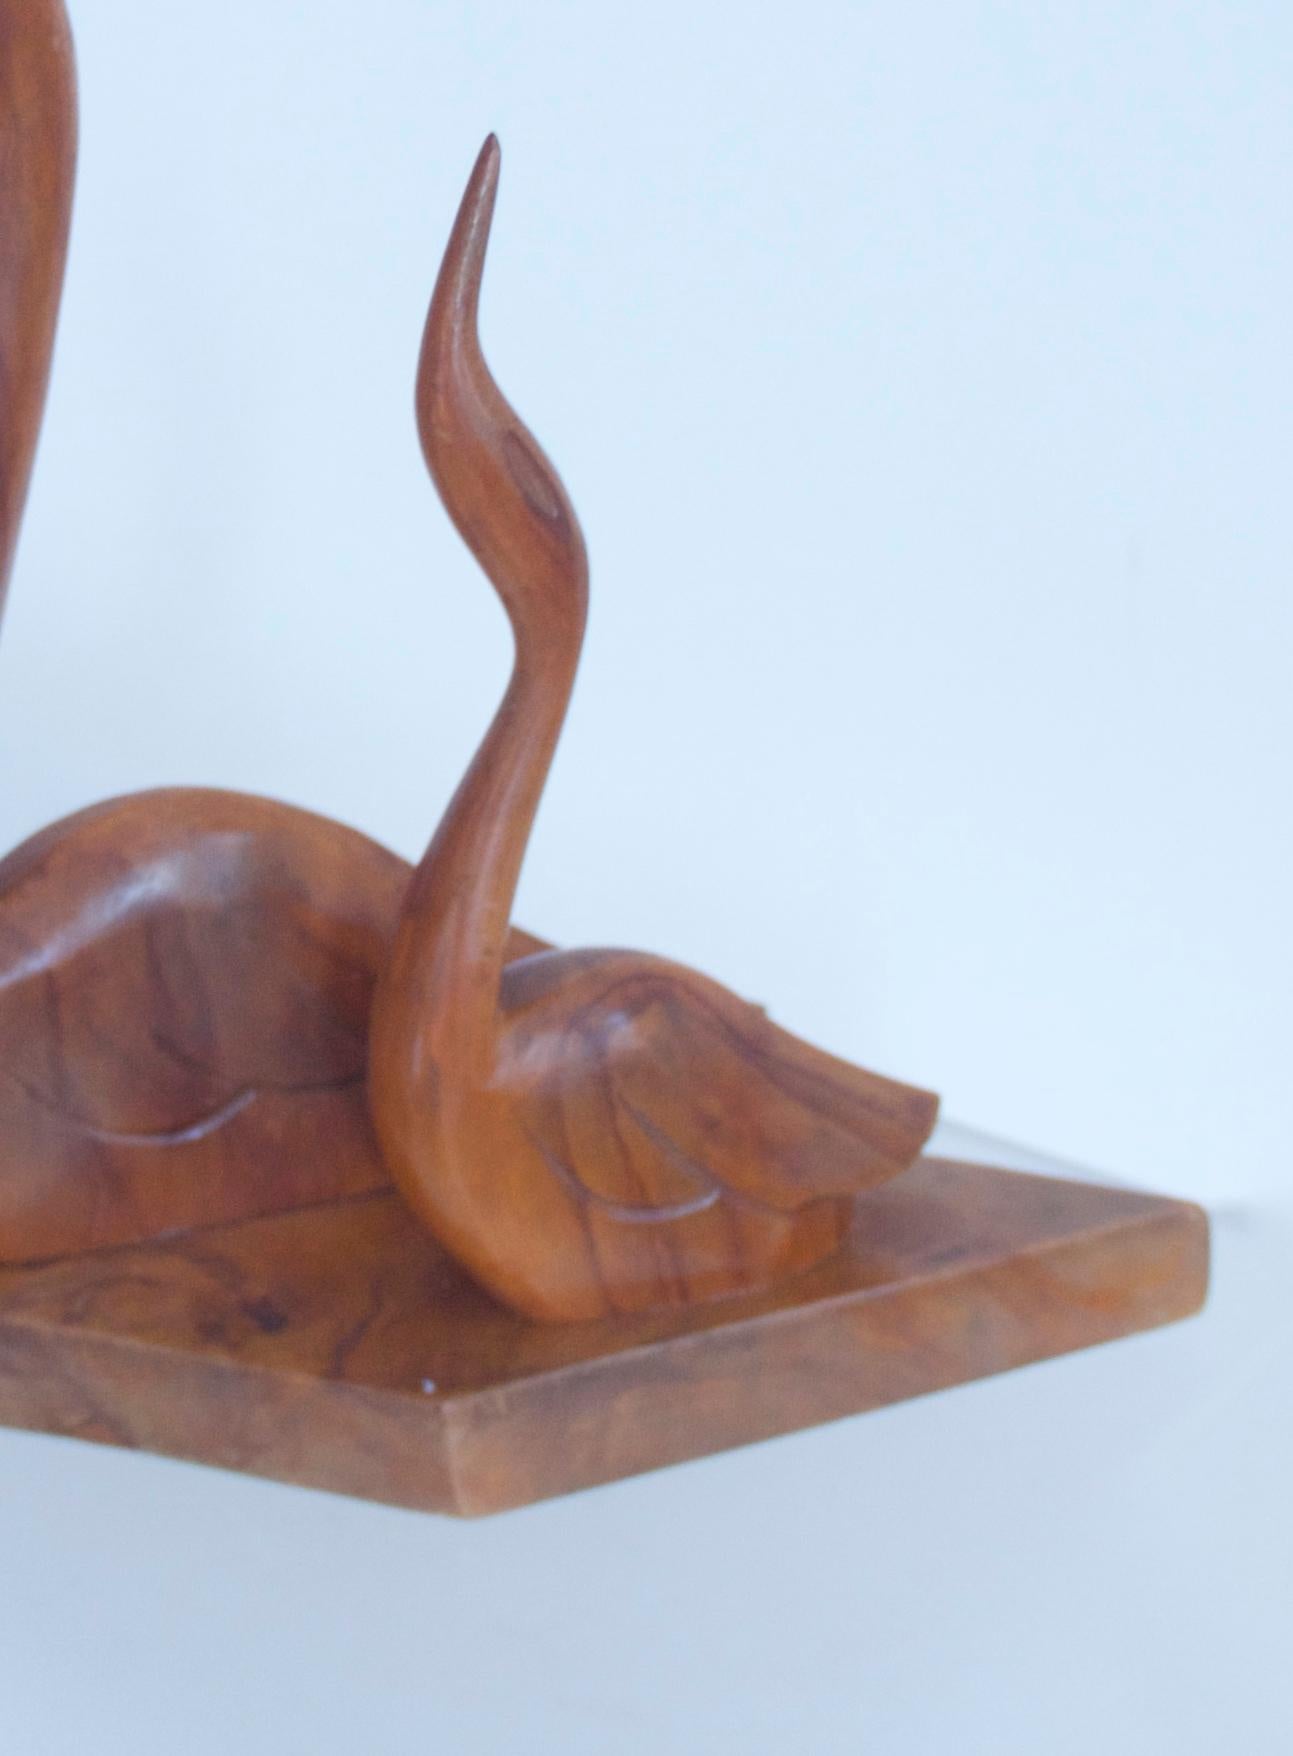 Scandinavian Modern hand carved sculpture - Pair of swans 1955 in polished teak typical of the figurative style of the mid-1950s

Measures: Height 20 cms, length 20 cms 
Weight 0.220 kgs.

 